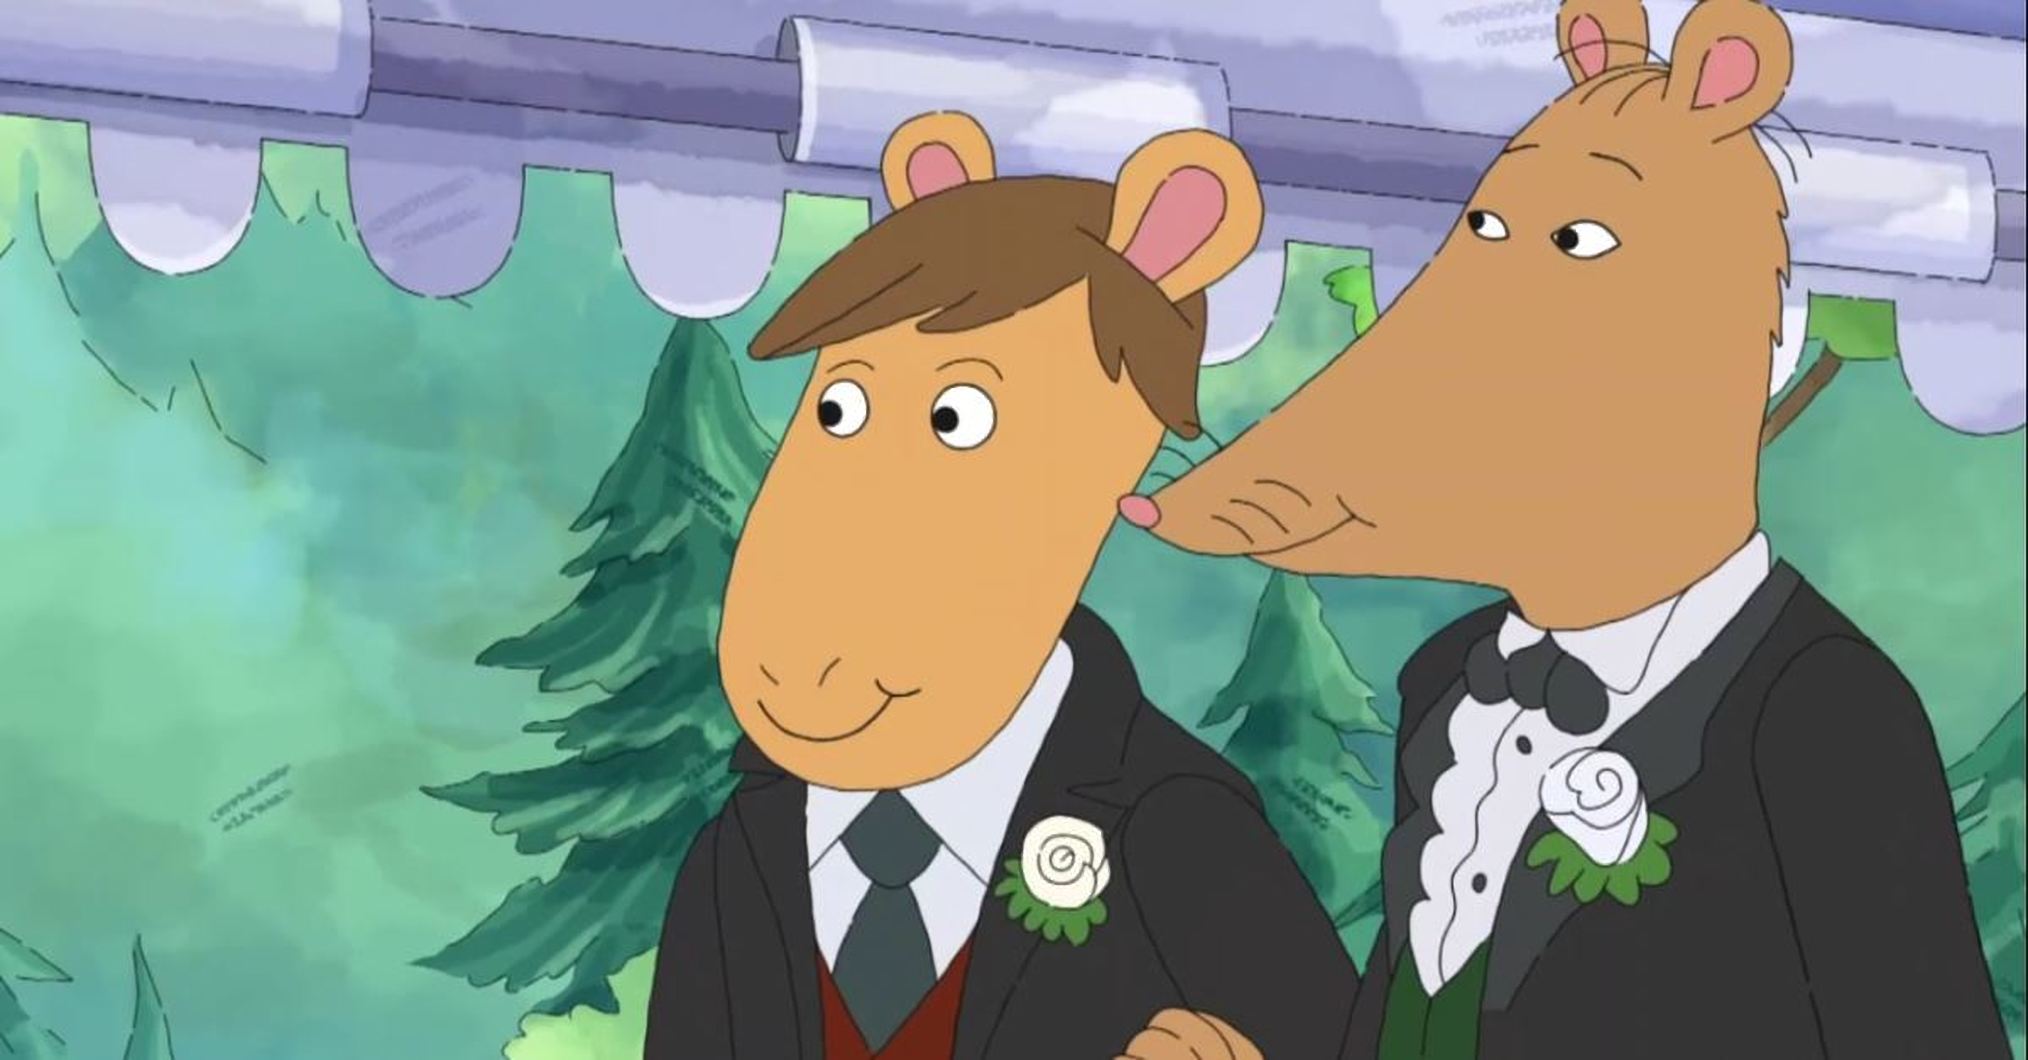 Mr Ratburn married his same-sex partner in an episode of Arthur which aired across most states called 'Mr Ratburn and the Special Someone'